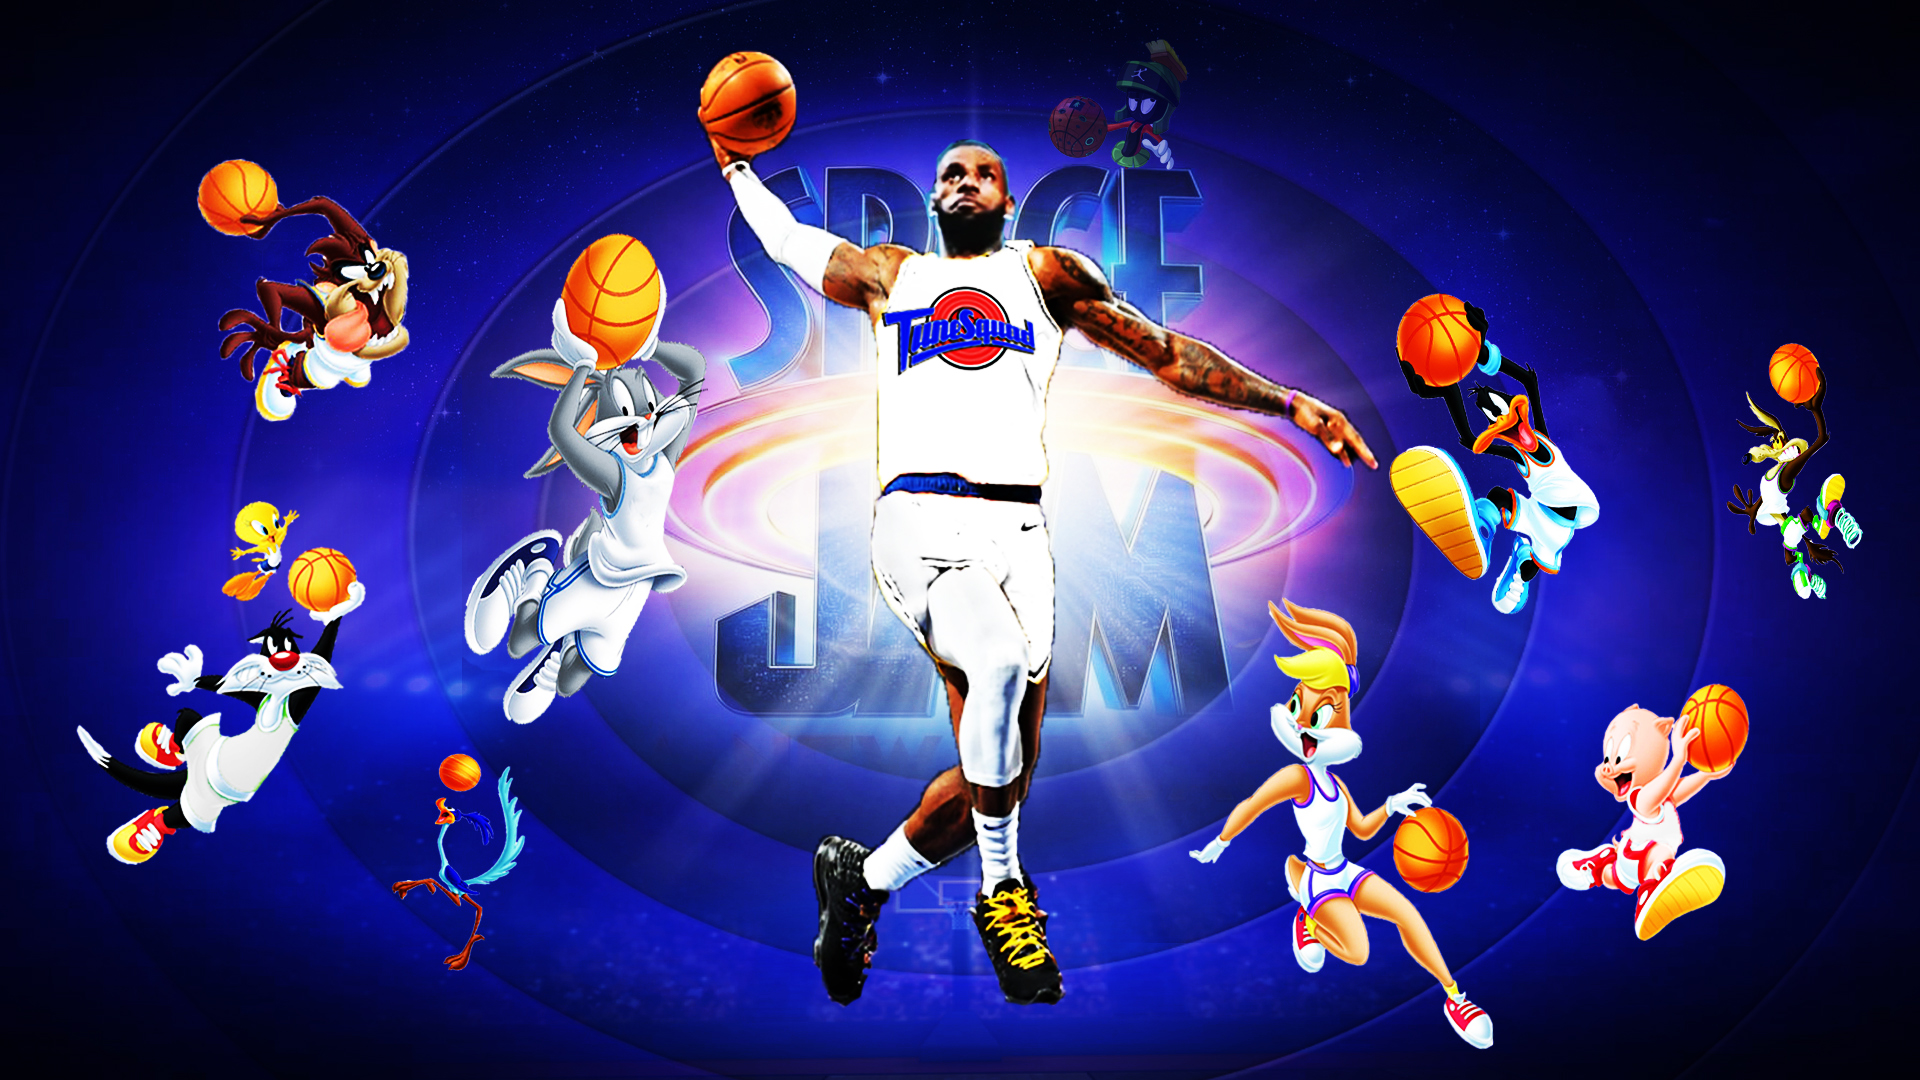 photo Poster Space Jam A New Legacy Wallpaper space jam a new legacy wallpa...